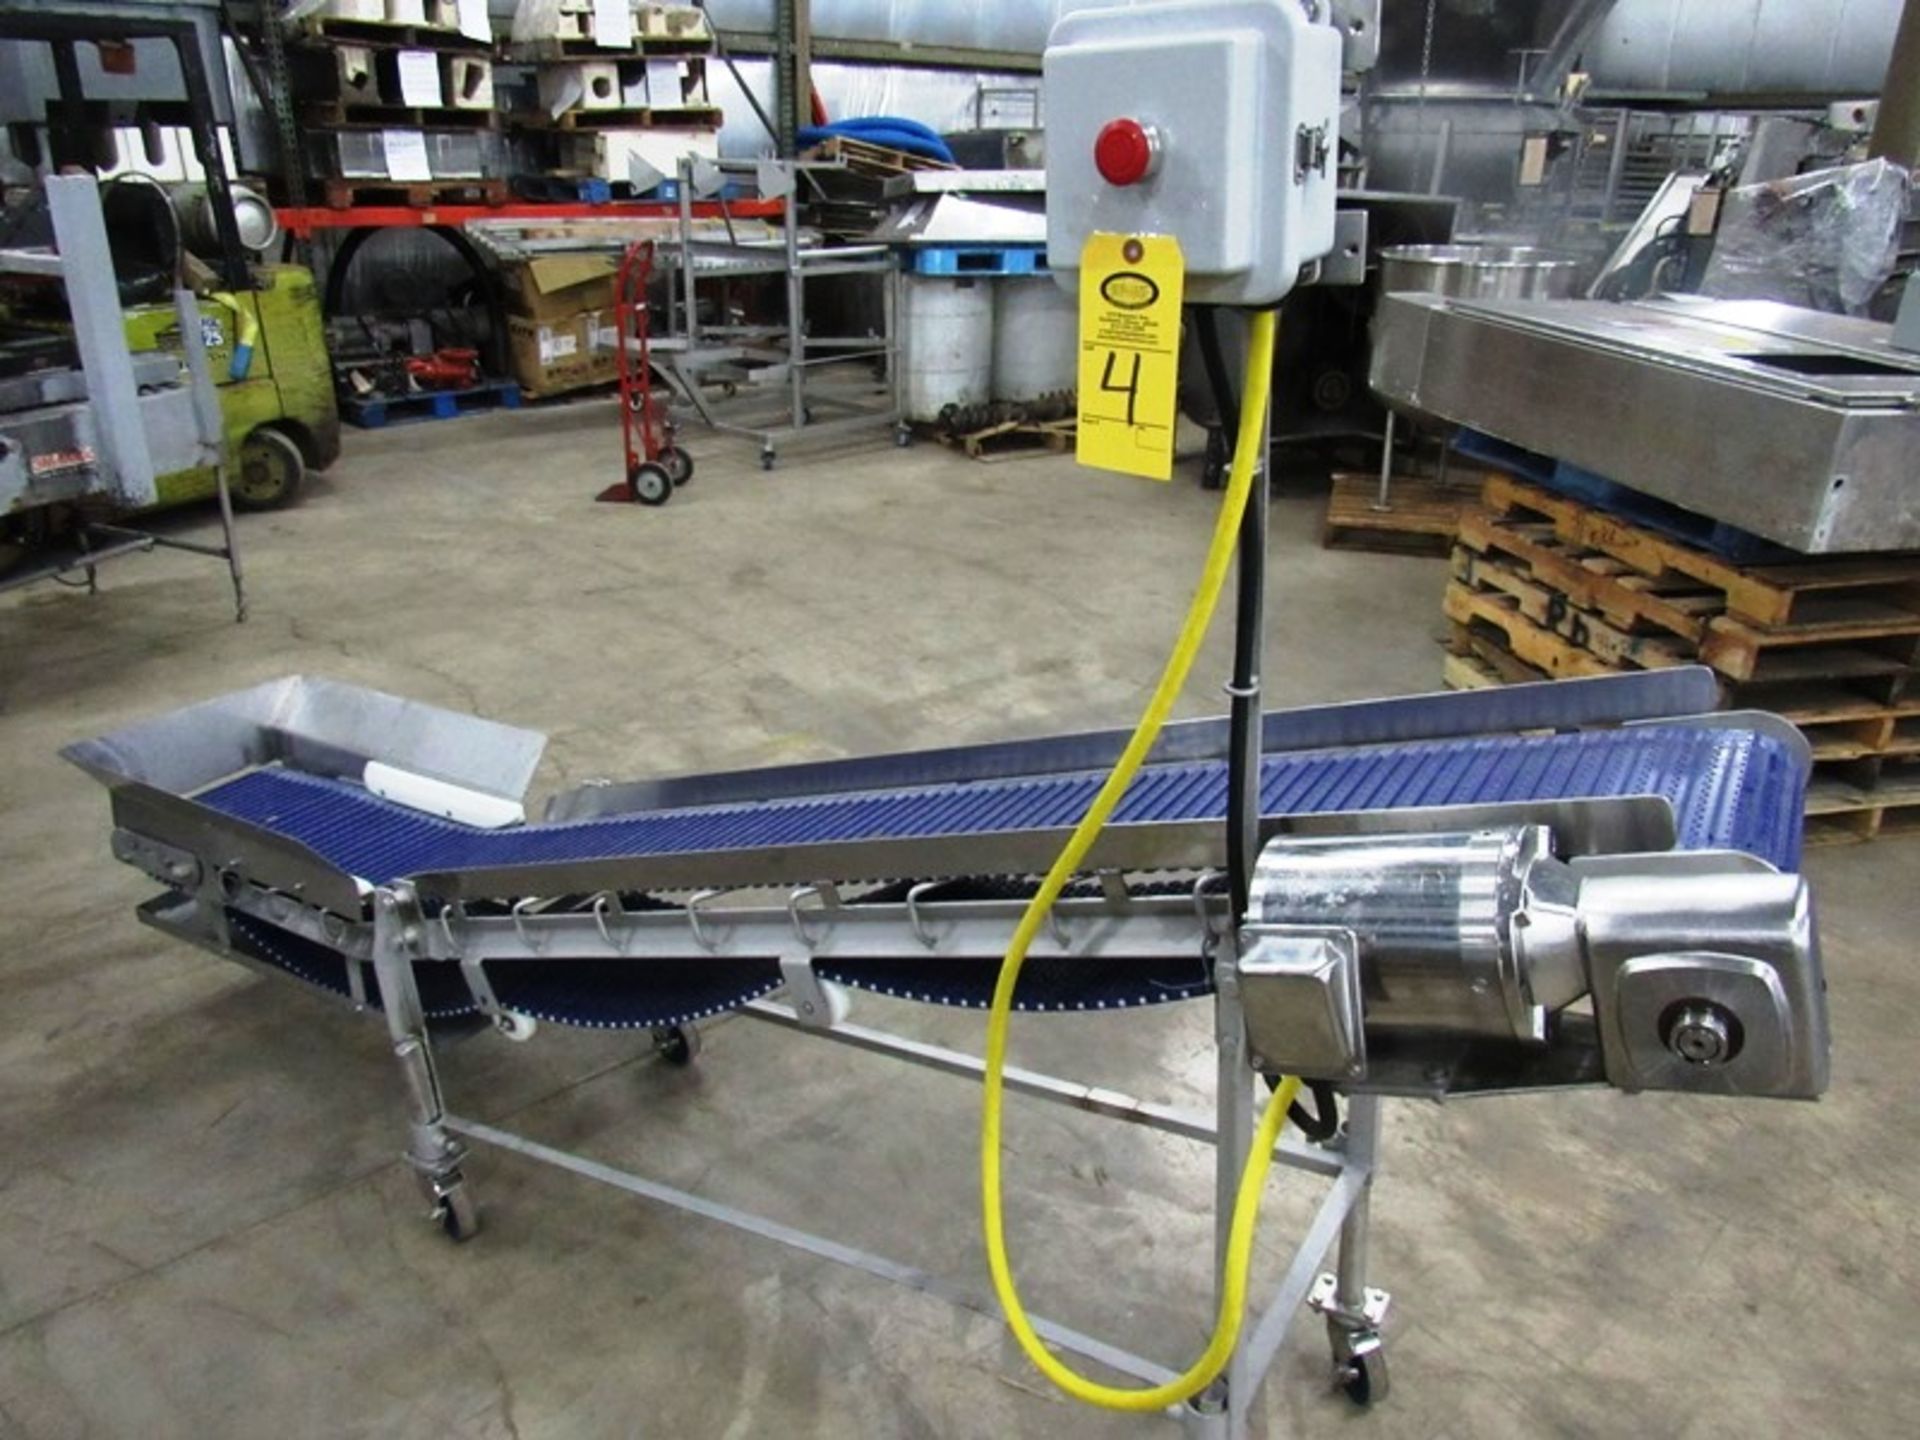 Stainless Steel Incline Conveyor, 12" W X 9' L cleated belt, 16" infeed height, 44" discharge,